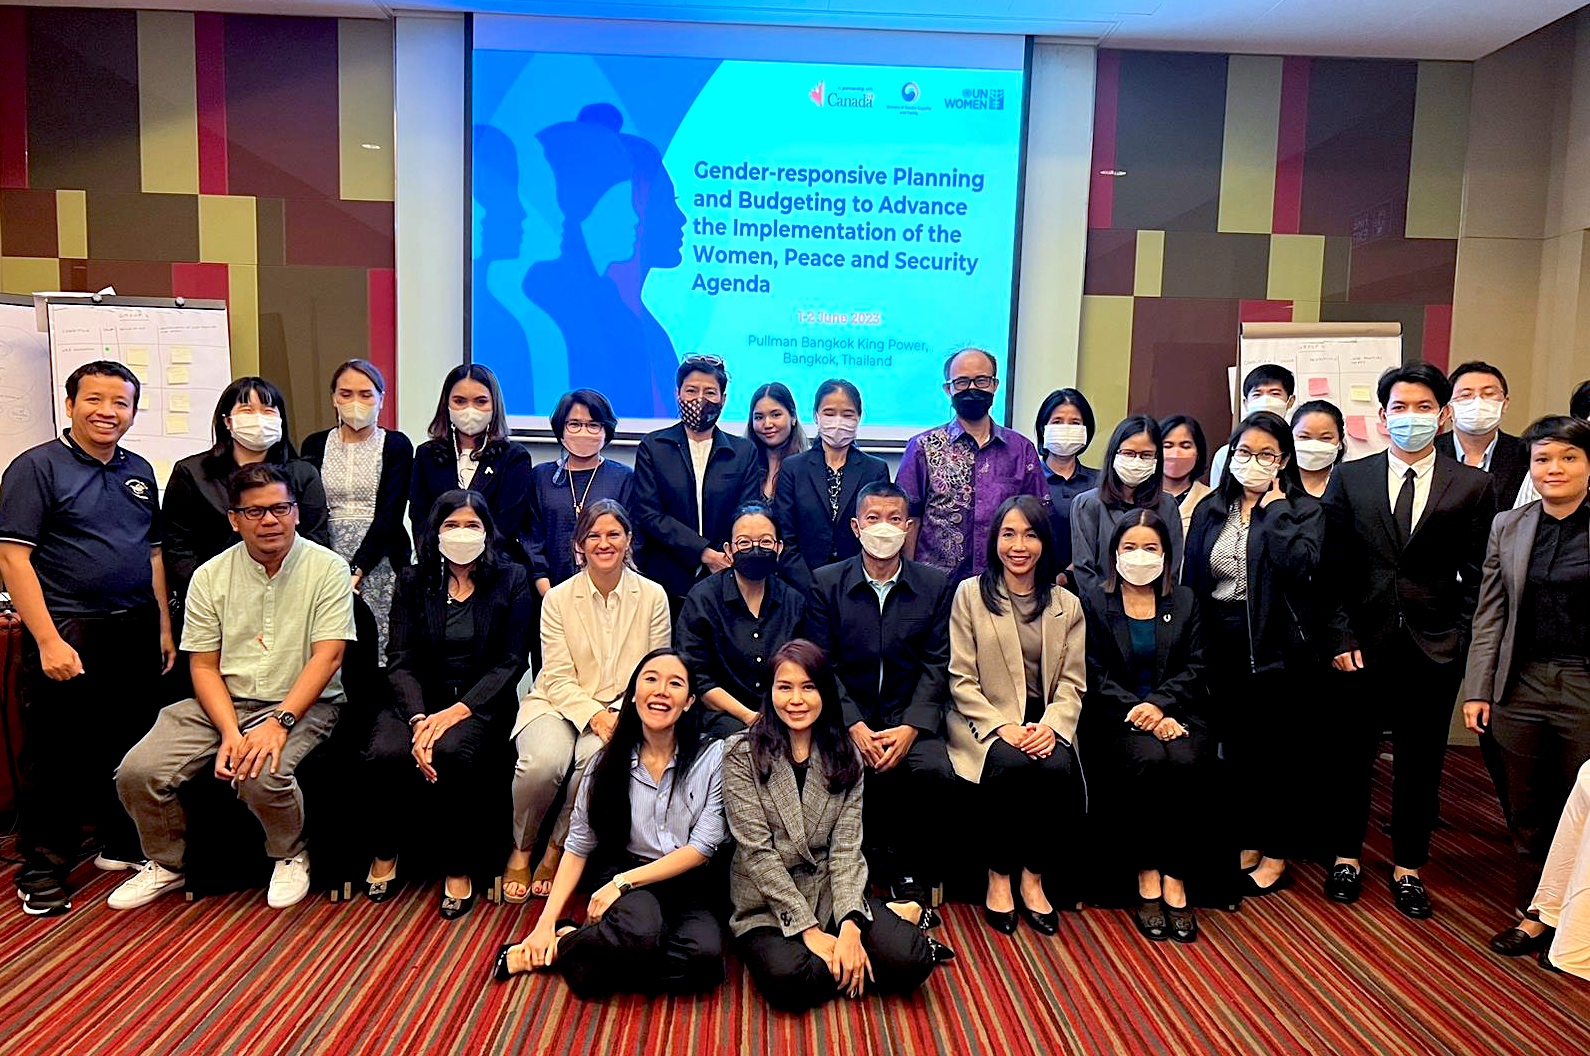 Participants are taking group photos at the Gender Responsive Planning and Budgeting Workshop to Advance the Implementation of the Women, Peace and Security Agenda in Bangkok, Thailand on 1 June 2023